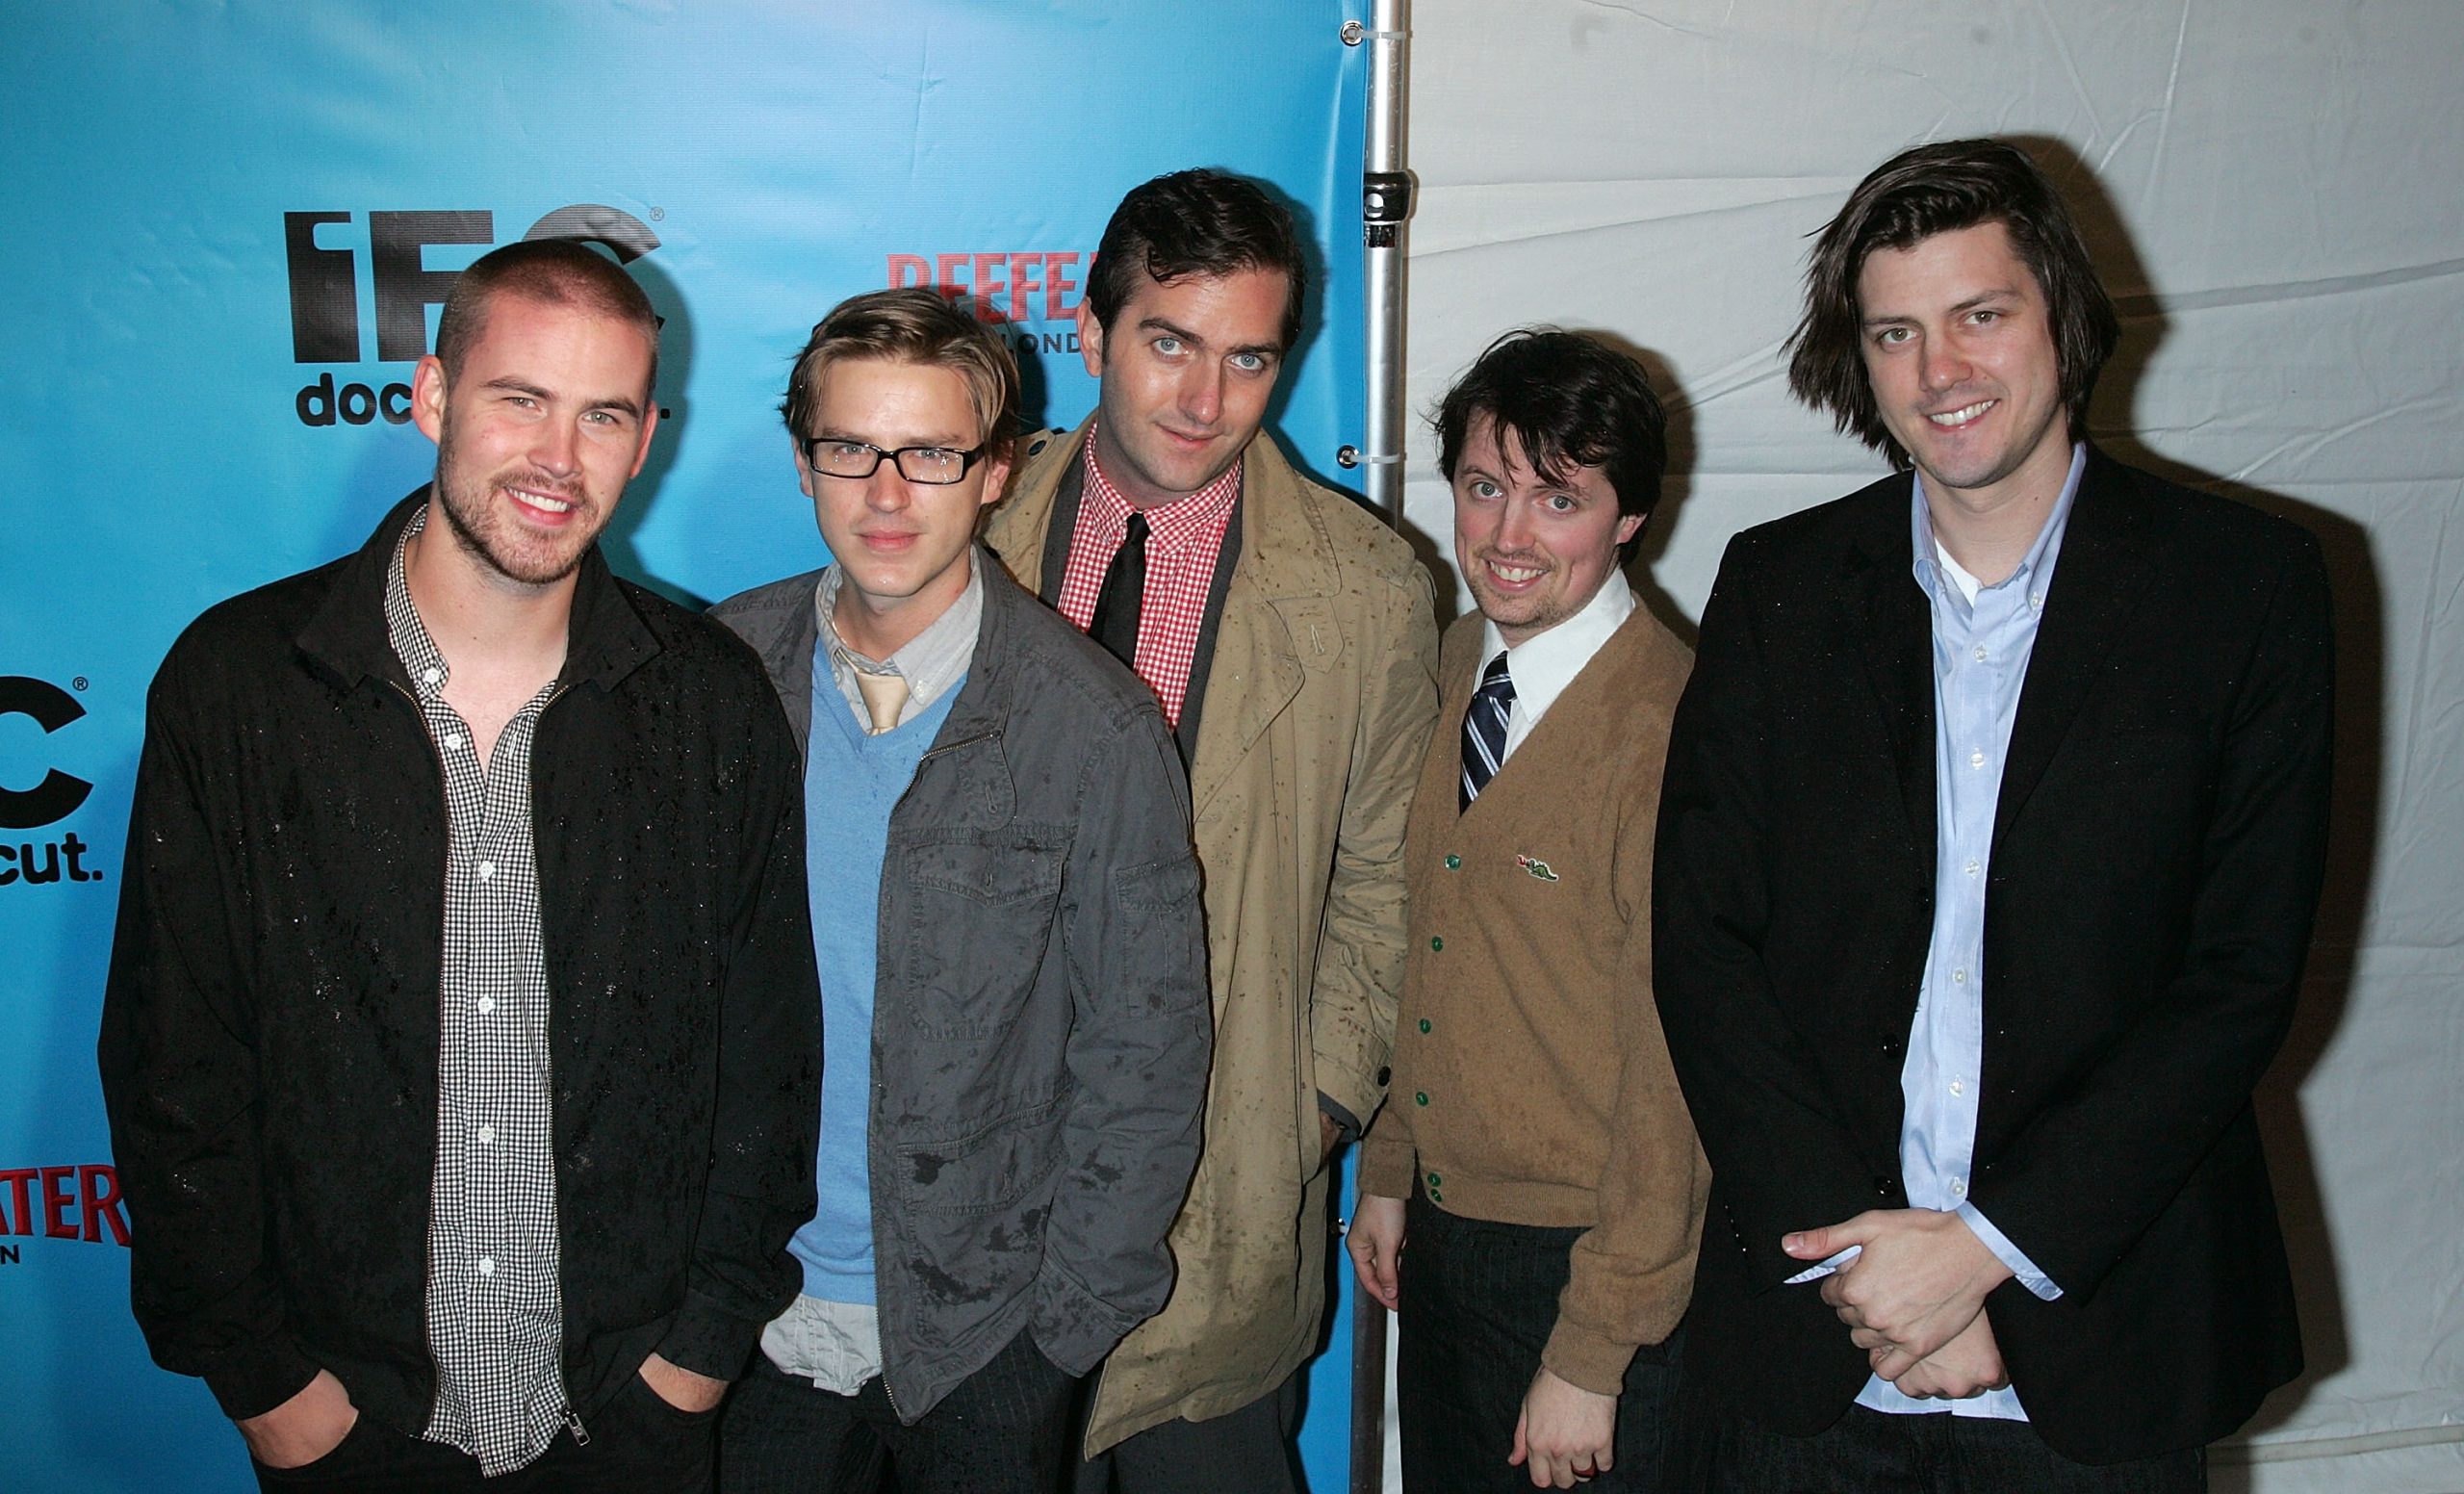 The cast of The Whitest Kids U Know attend the IFC & BAFTA Monty Python 40th Anniversary event at the Ziegfeld Theatre on October 15, 2009 in New York City. (Photo by Jim Spellman/WireImage)